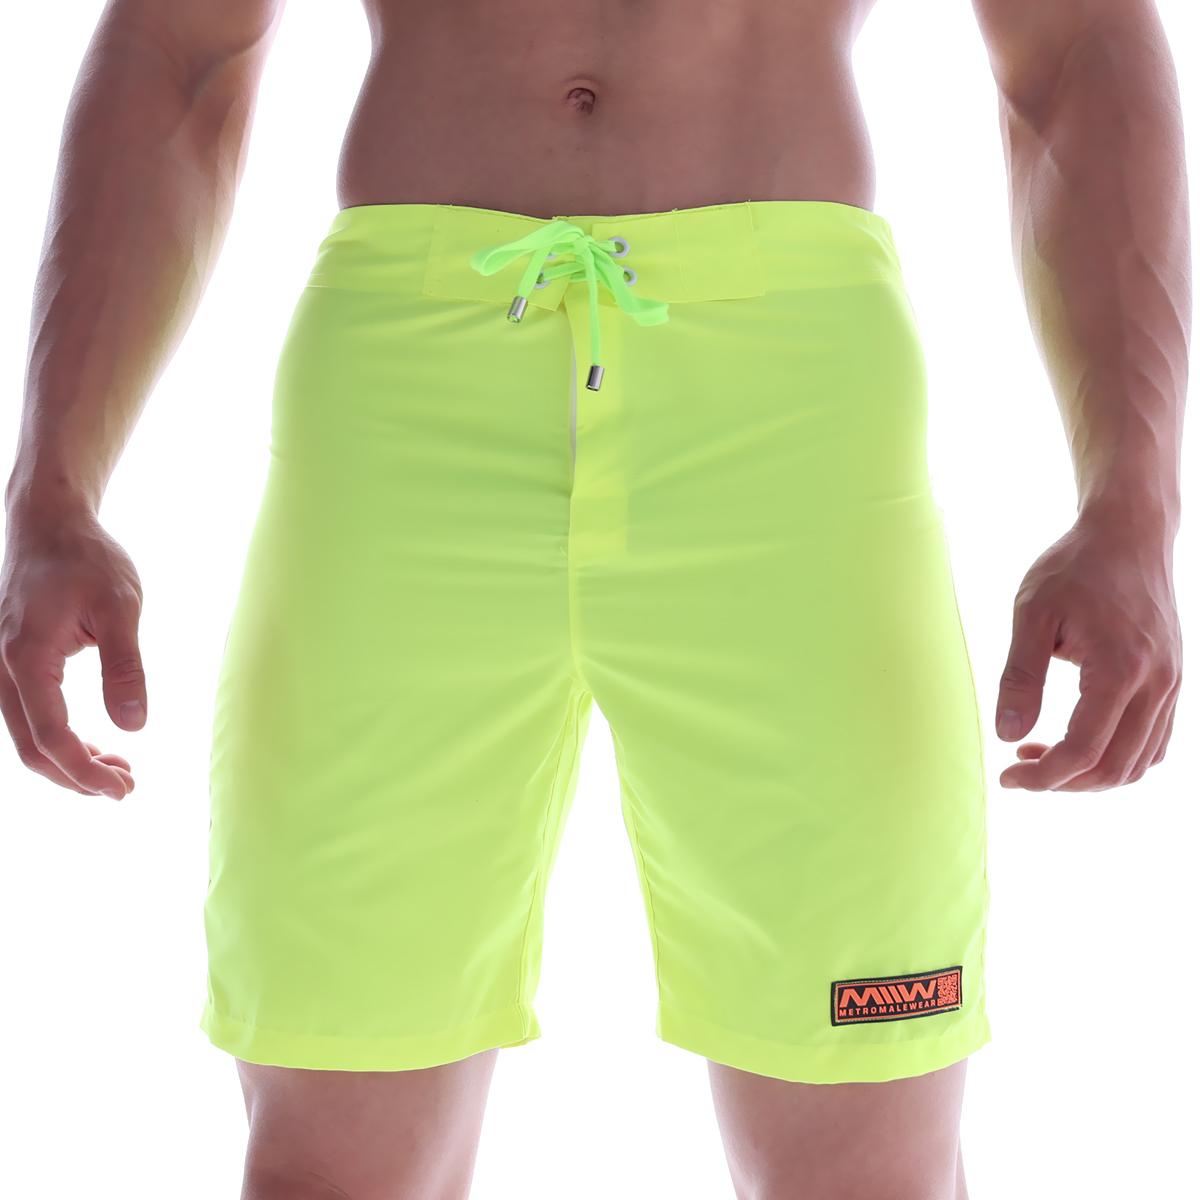 [M2W] Physique Board Short Neon Green (4706-07)